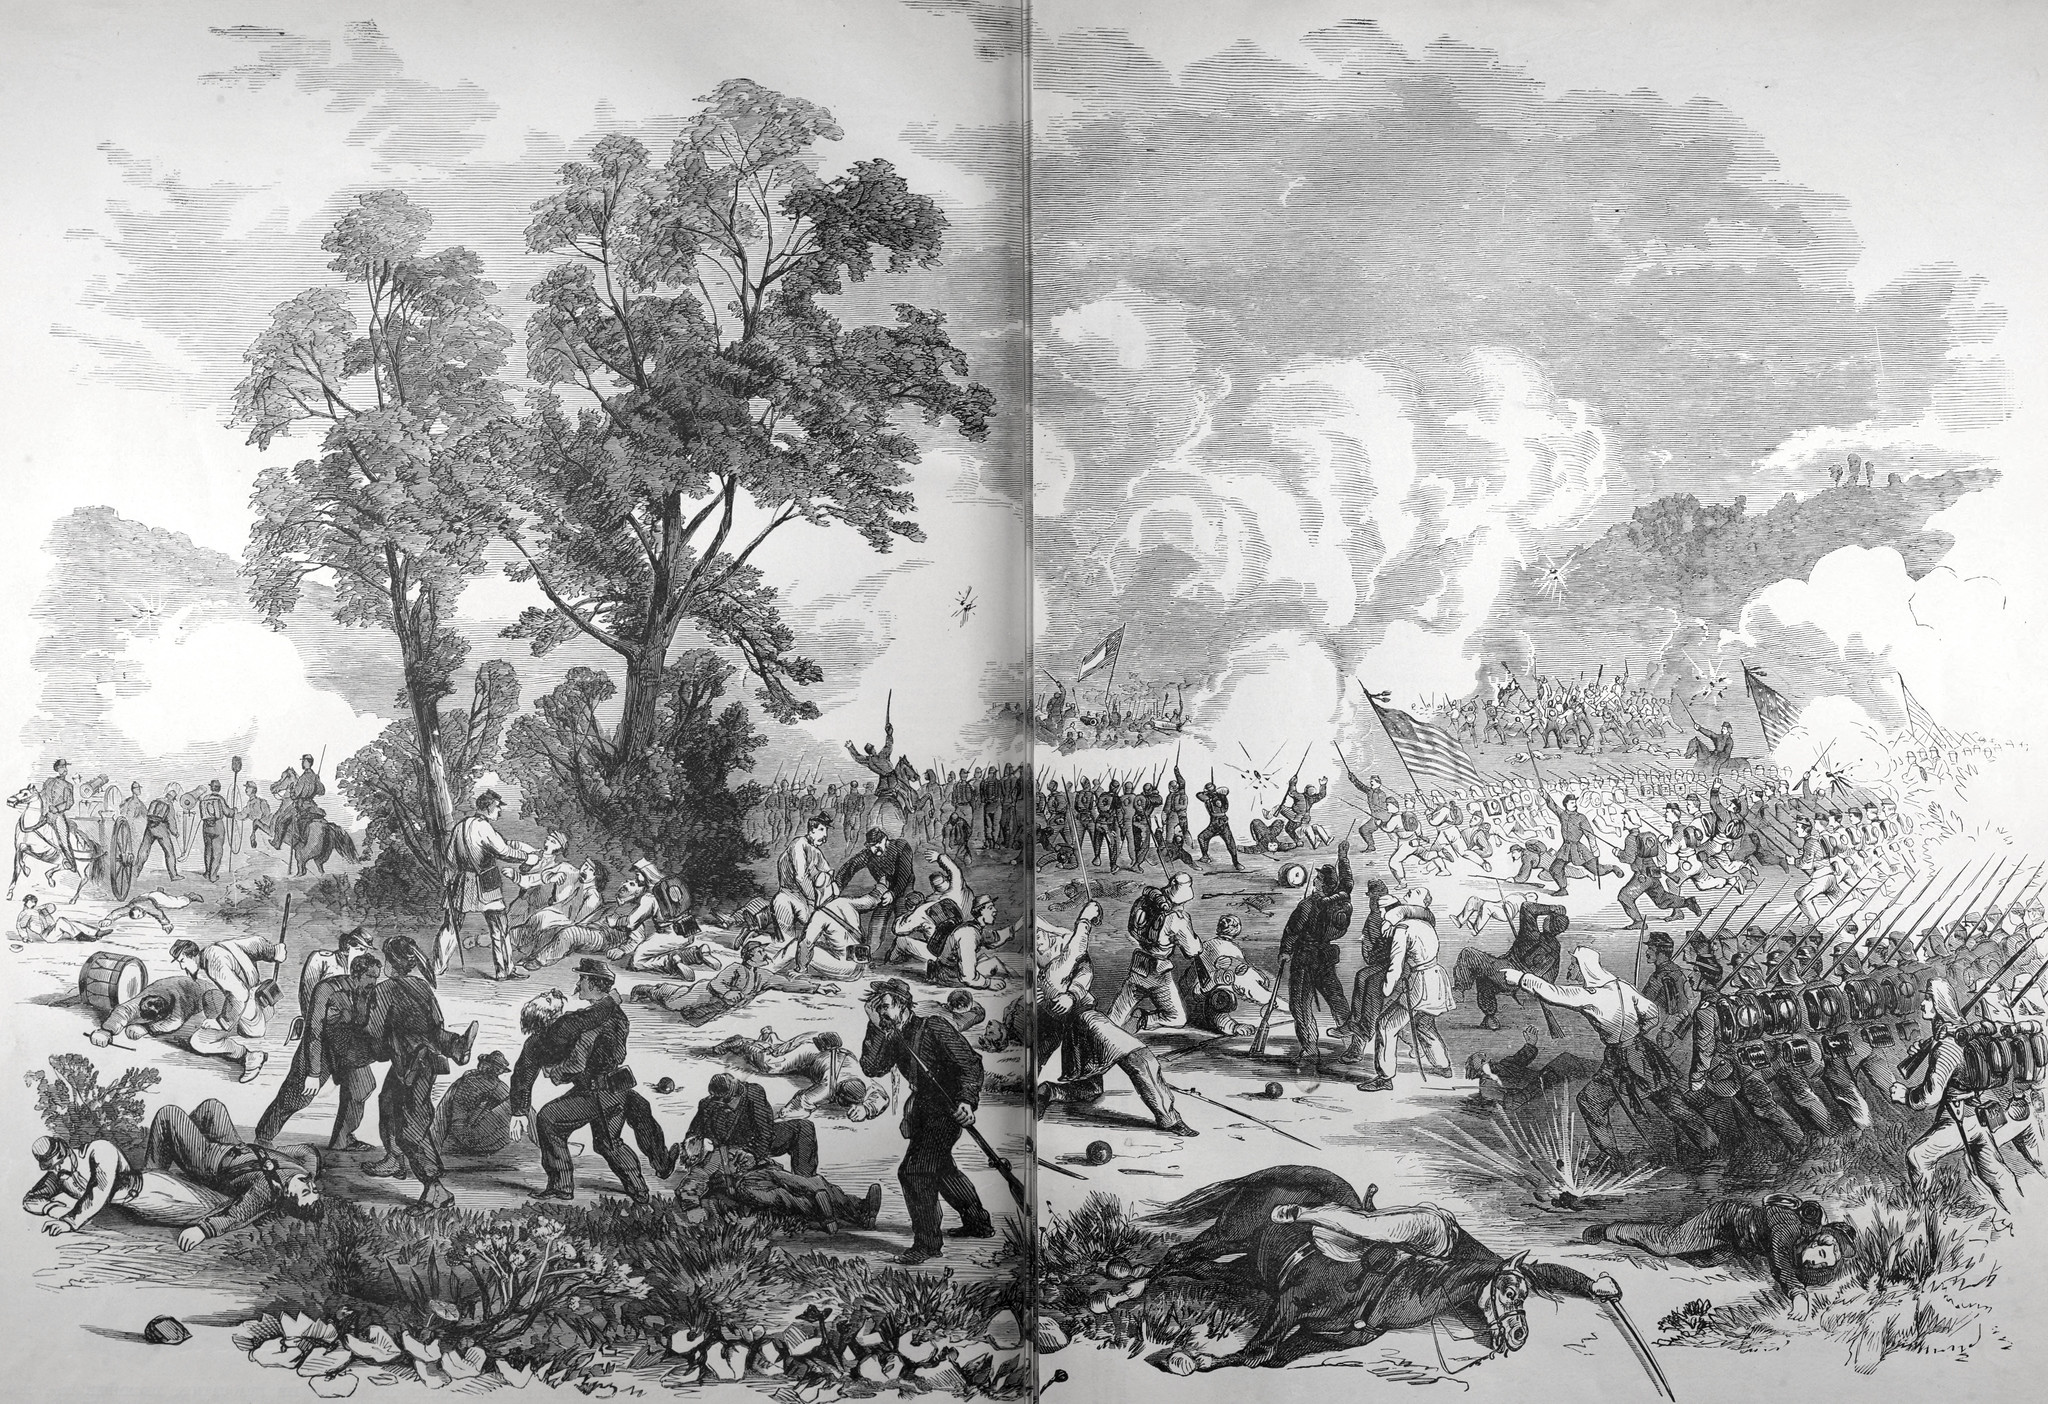 Battle of Bull Run, Va., July 21st, 1861, Between the Federal Army, Commanded By General McDowell, and the Confederate Army, Commanded by Generals Beauregard and Johnston.